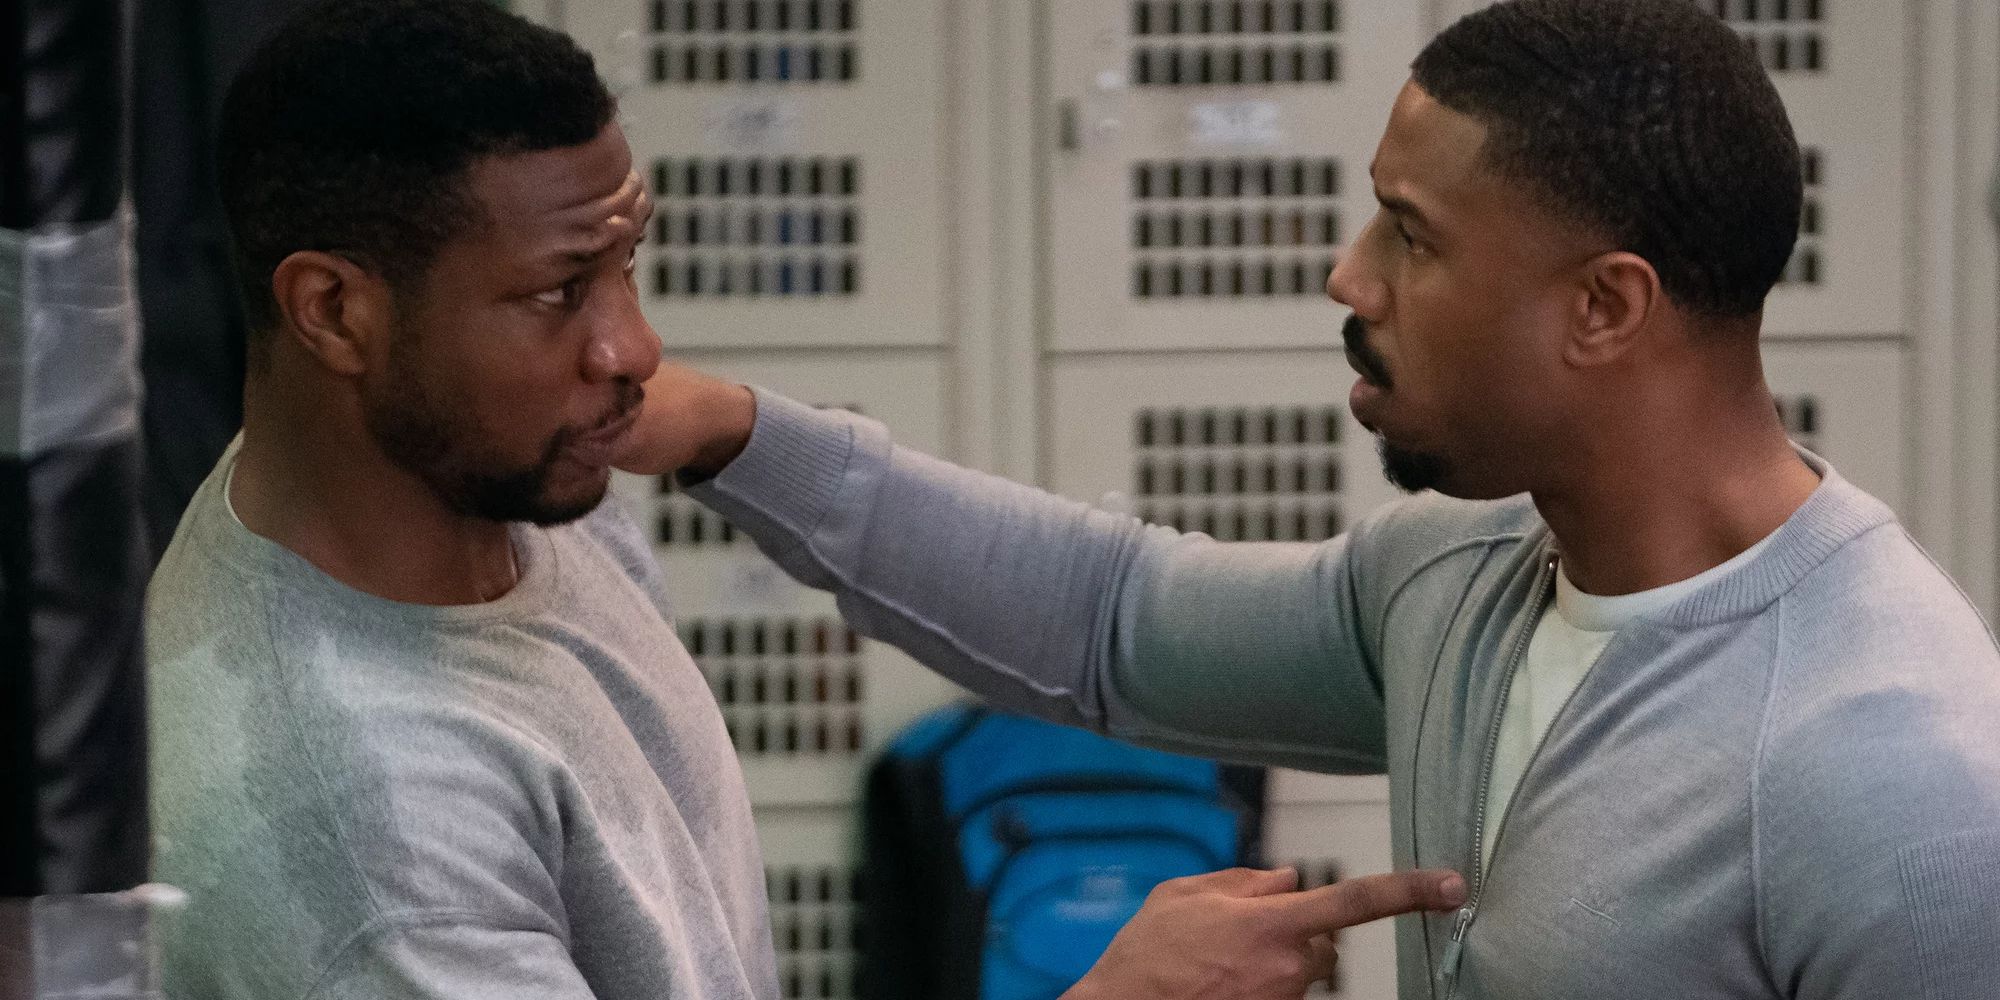 Michael B Jordan and Jonathan Majors as Adonis "Donnie" Creed and Damian Anderson, talking in a locker room in Creed III